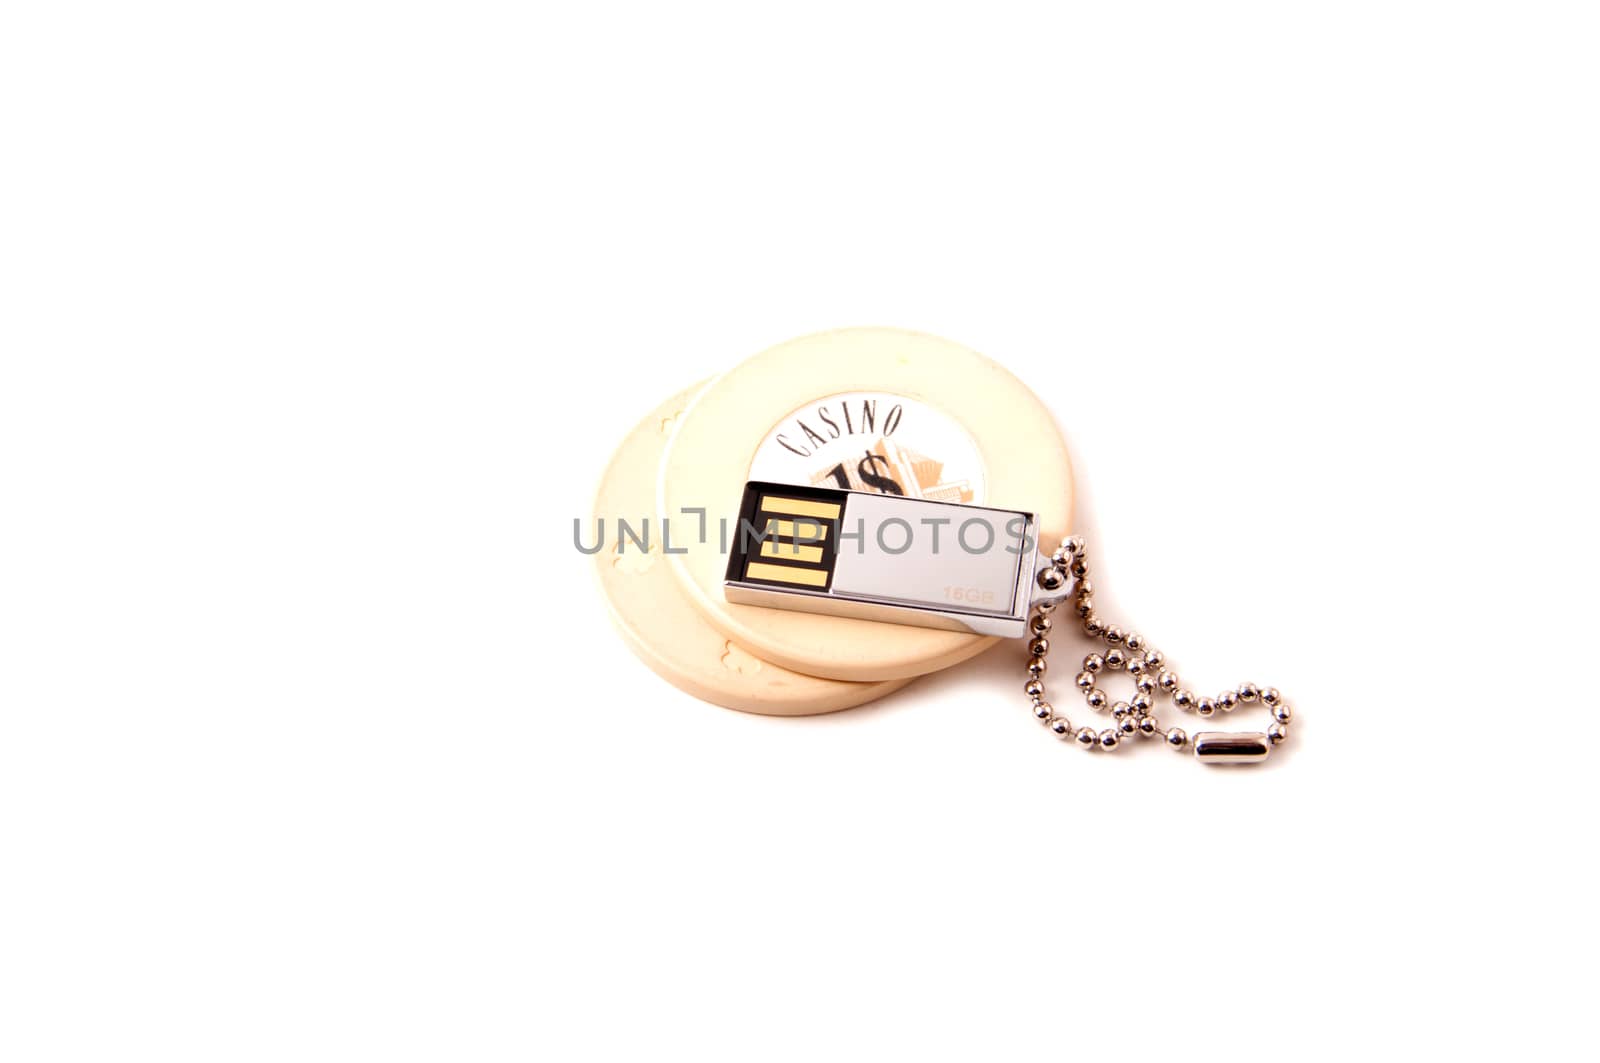 Casino chip with an USB key by daoleduc